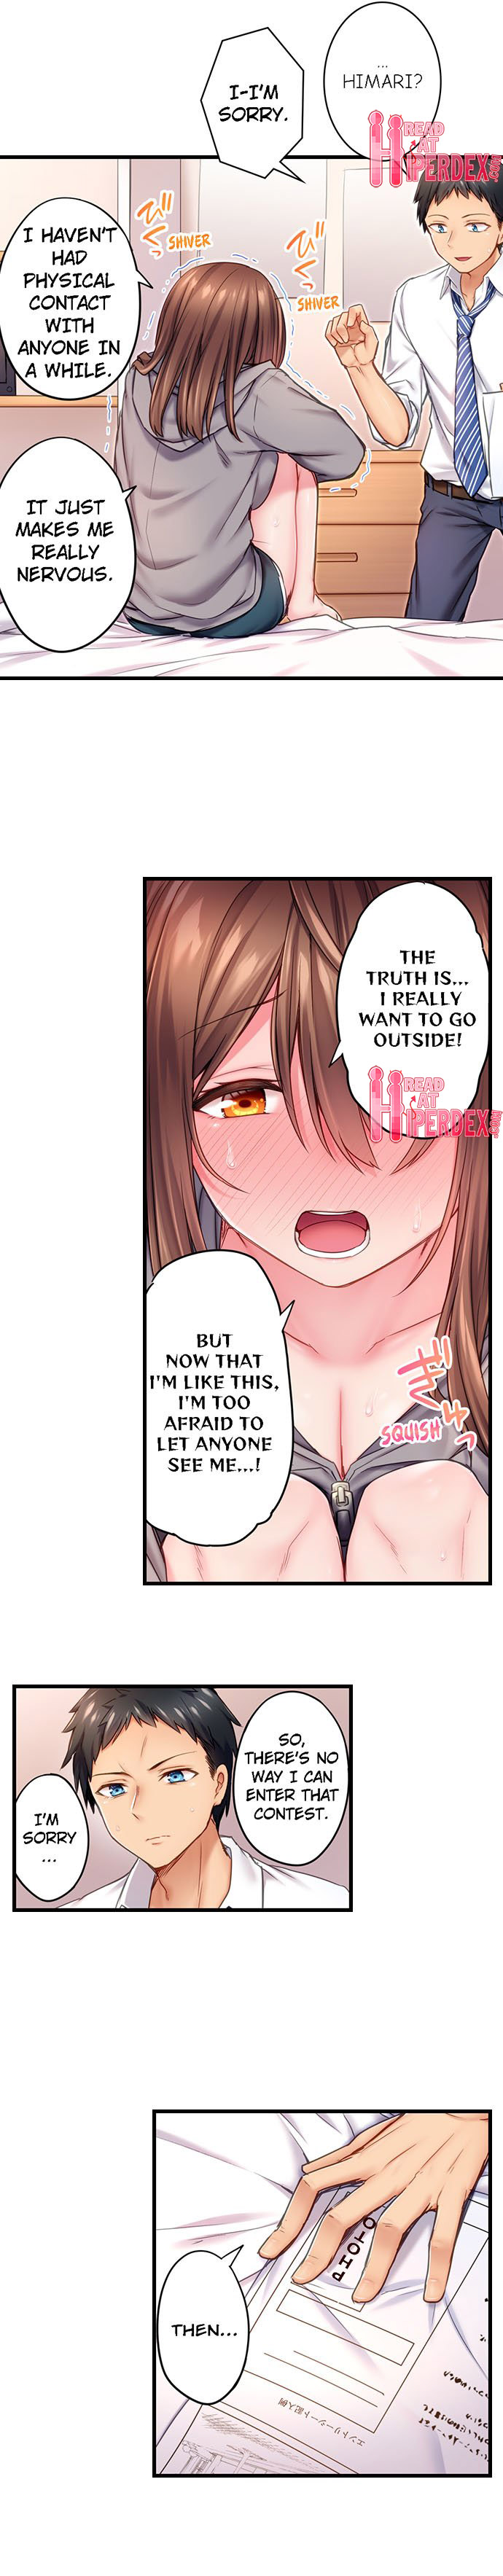 Can’t Believe My Loner Childhood Friend Became This Sexy Girl - Chapter 2 Page 4